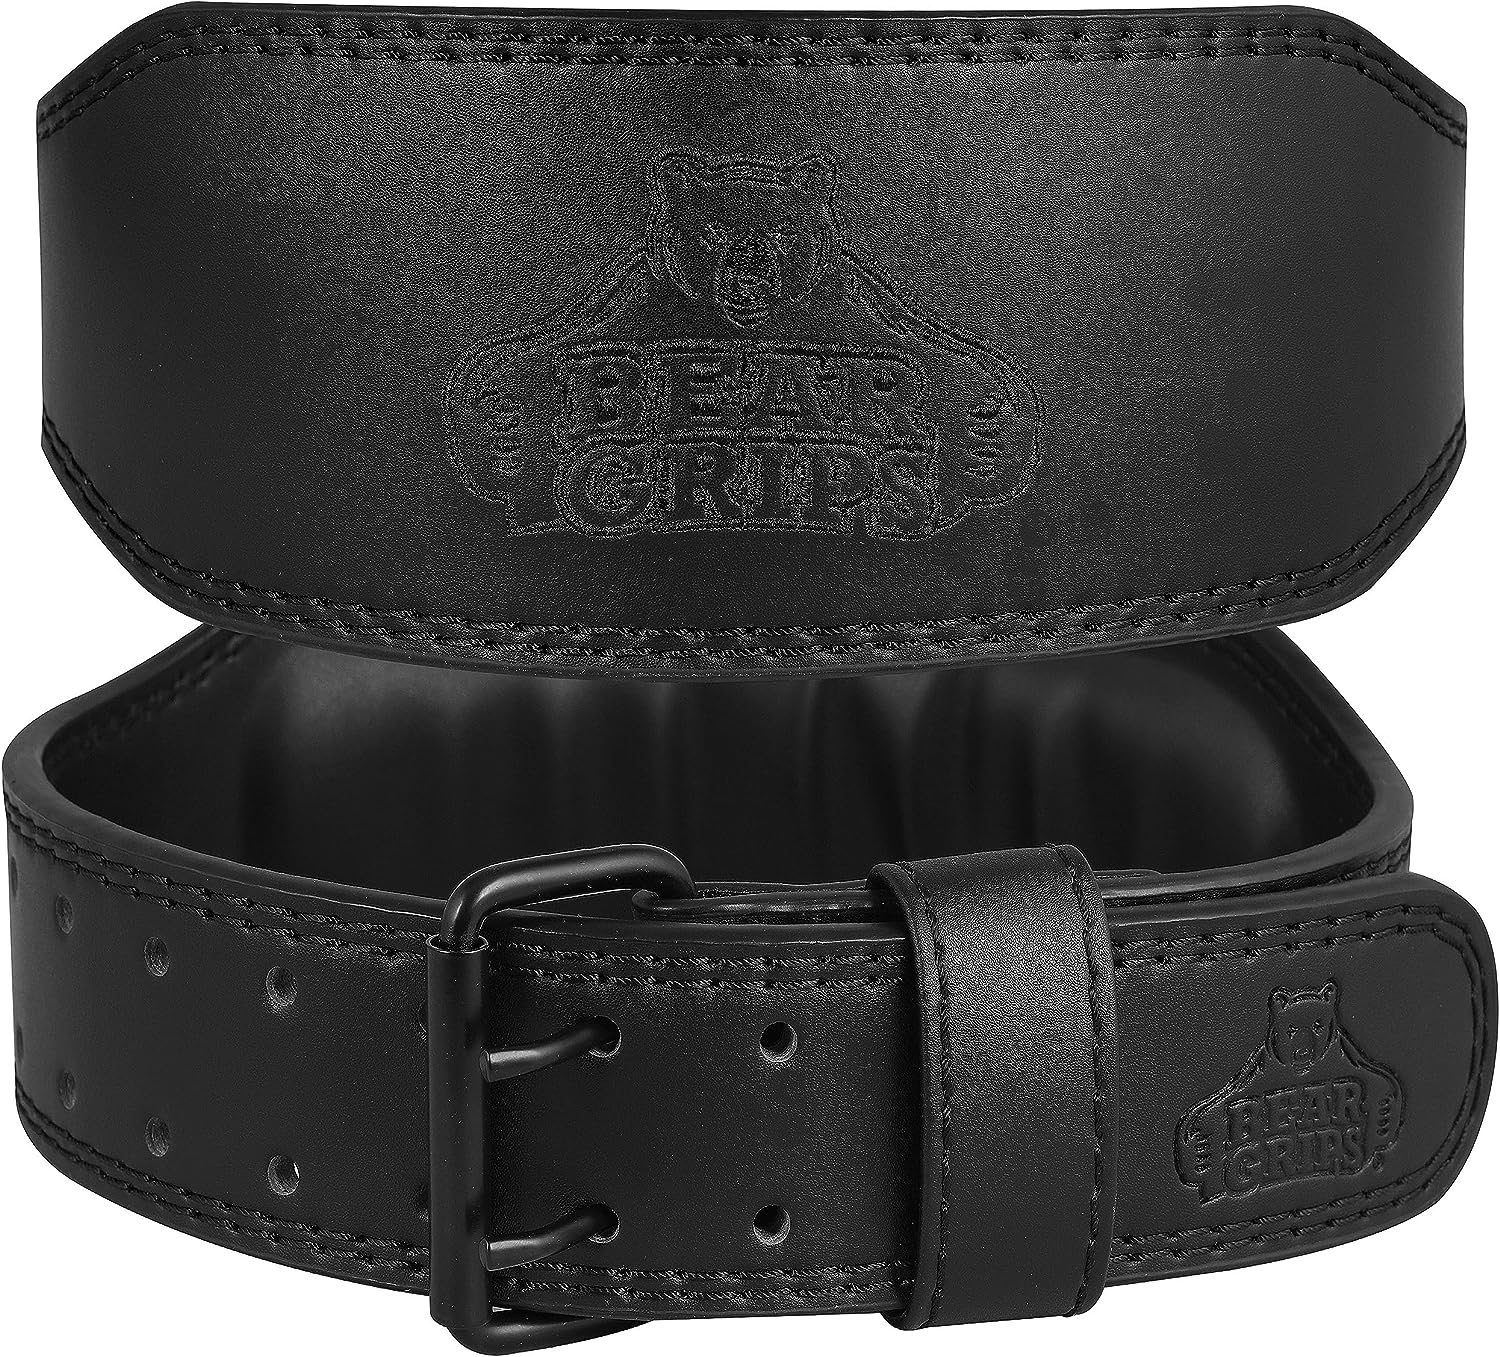 7mm Leather Belt - Padded Back Support - Contour Shape - Double Prong